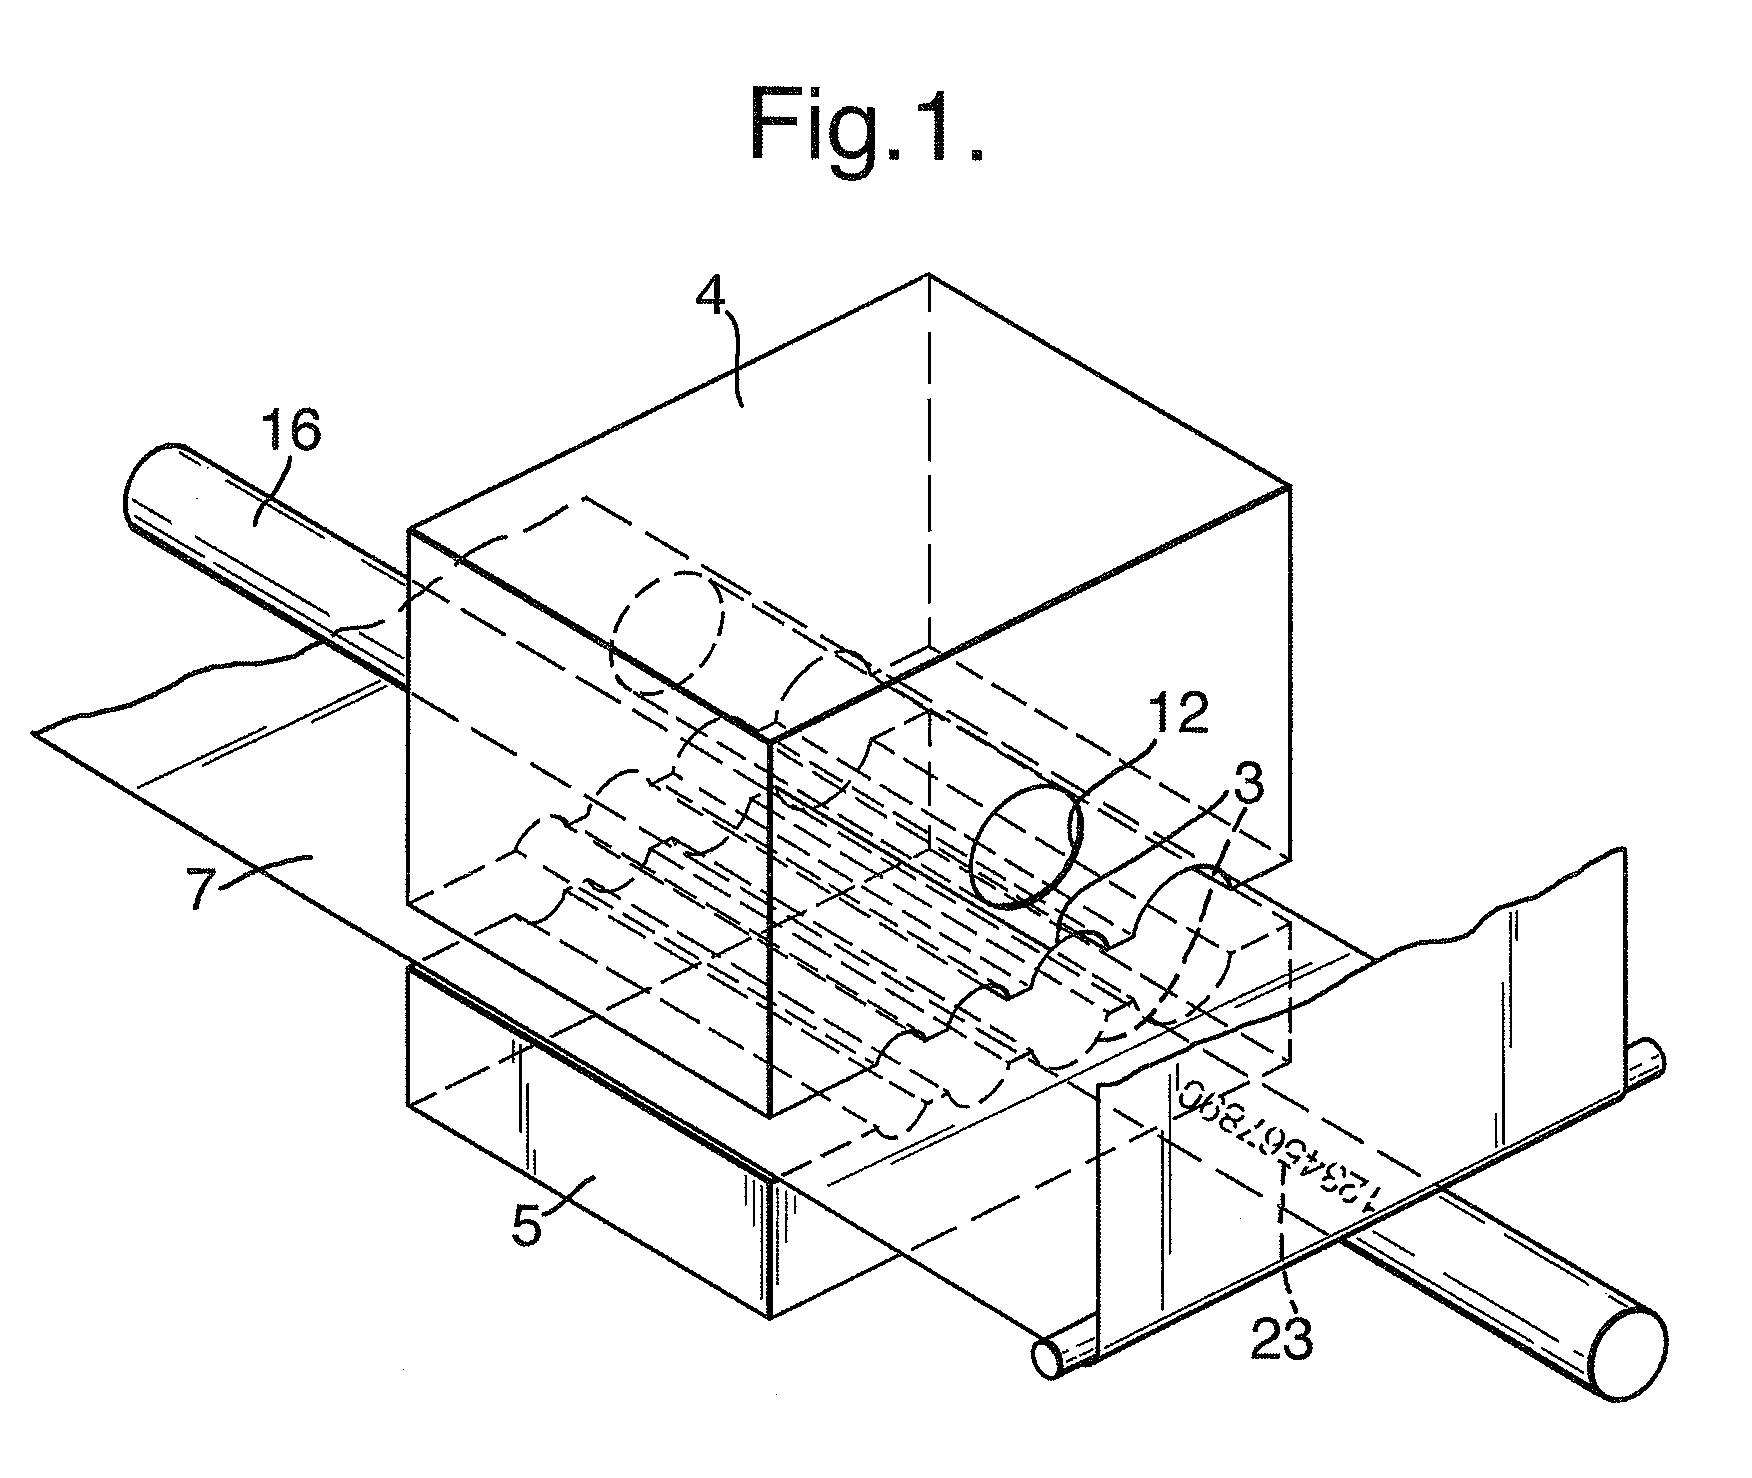 Printing device for printing markings onto insulated round wires